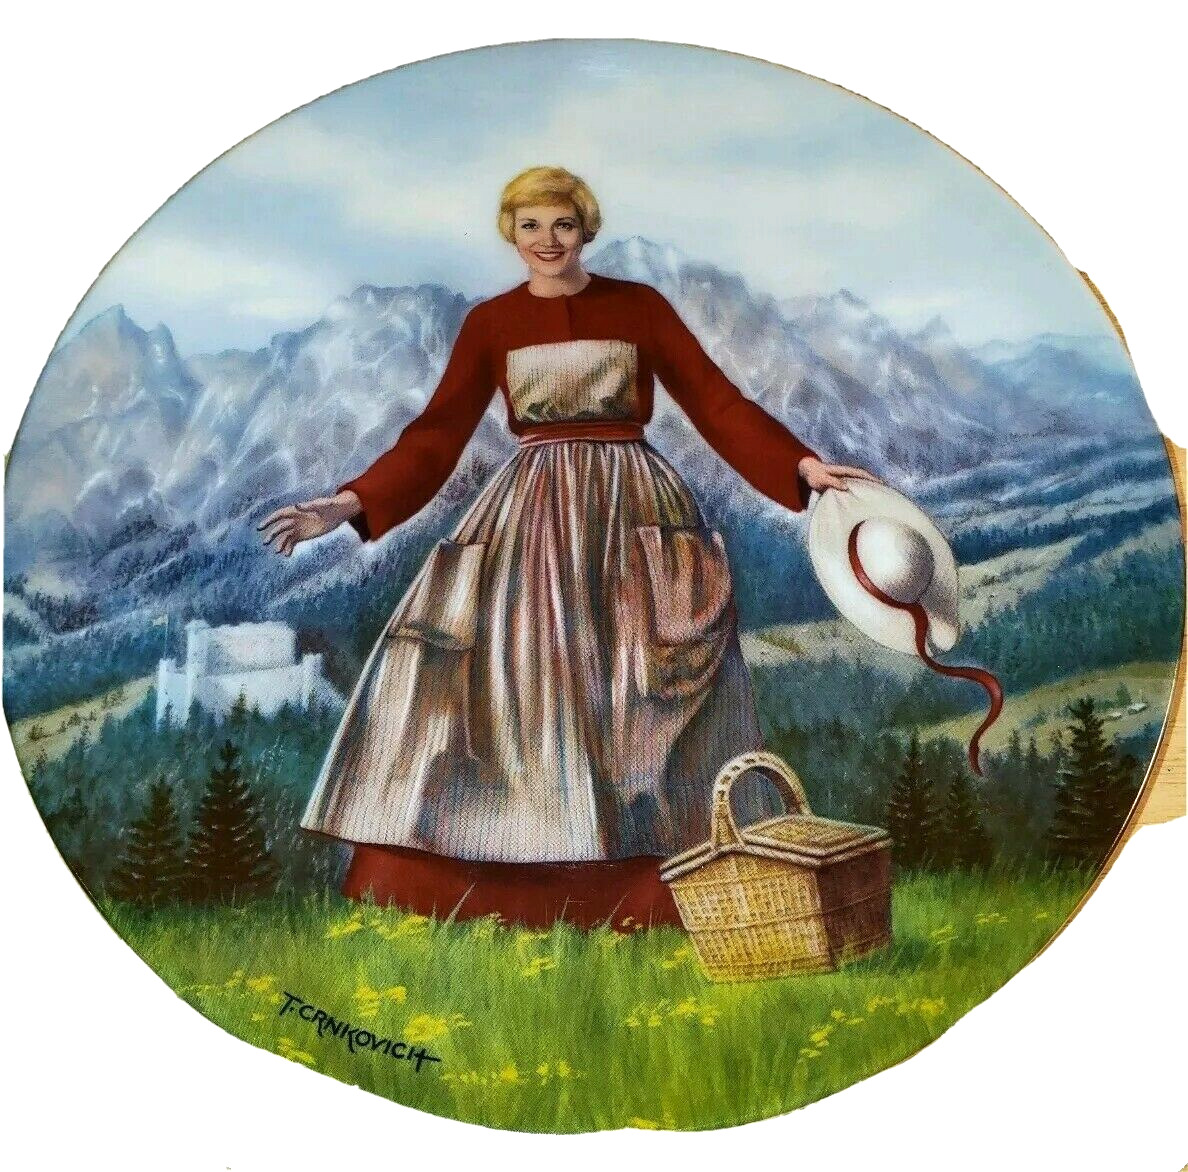 The Sound Of Music 1986 Plate Edwin M Knowles No 9856K Bradex Number 84-K41-18.1